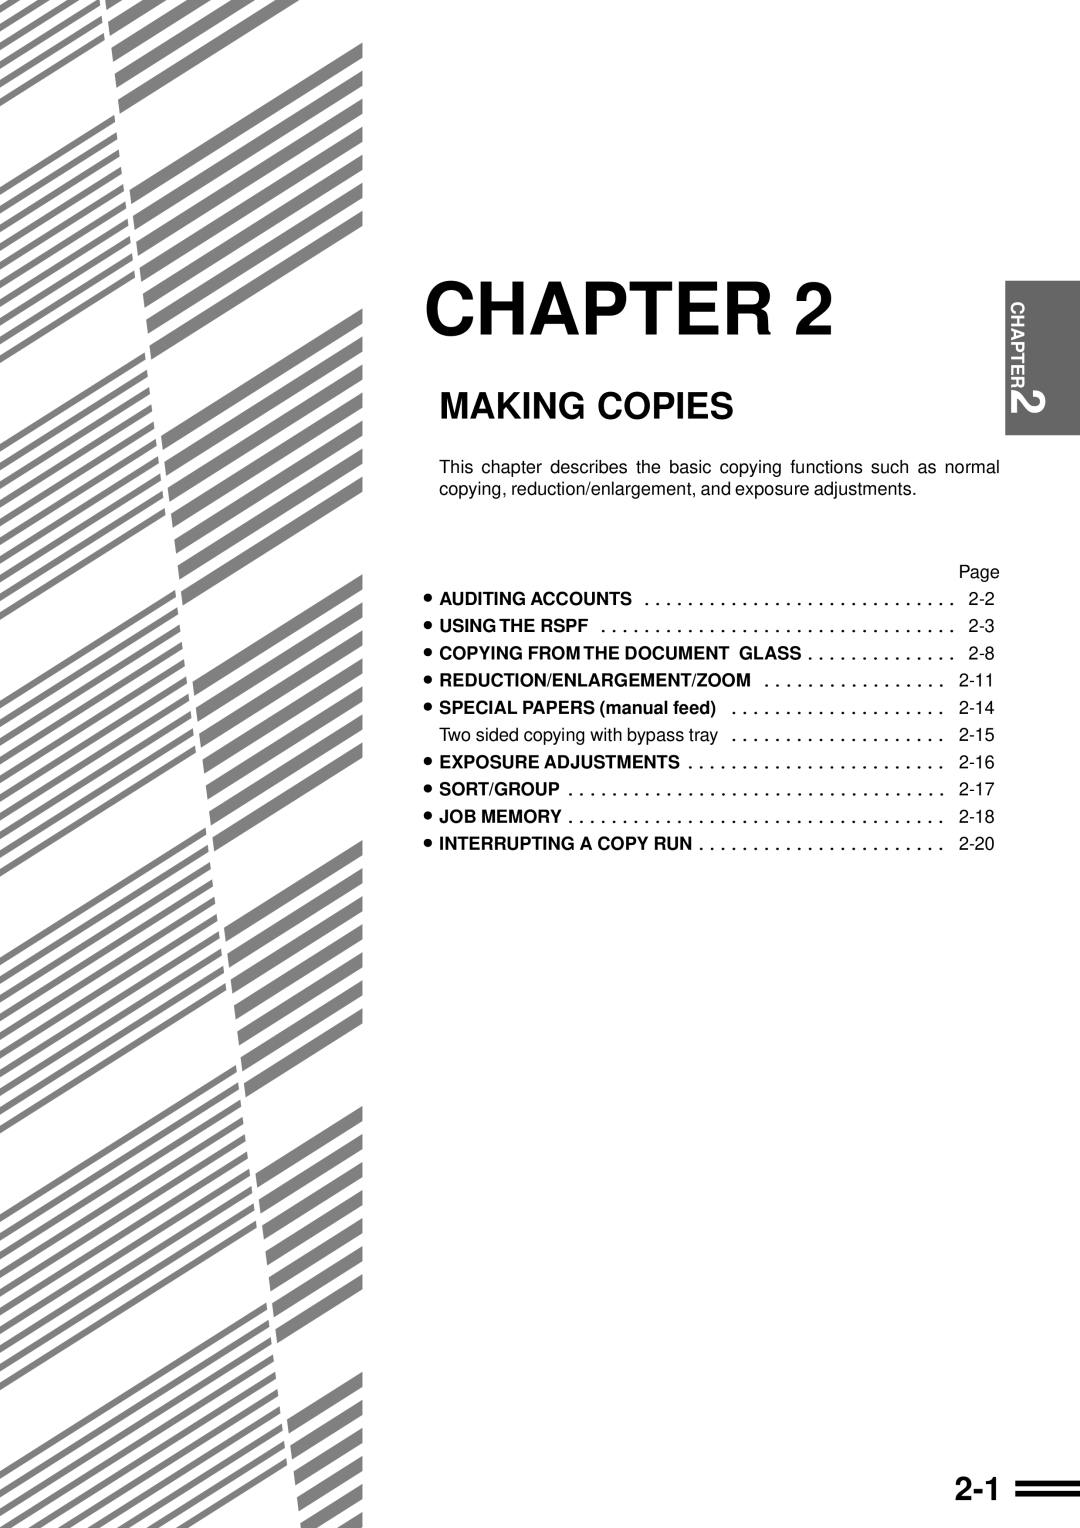 Sharp AR-287 Making Copies, Chapter, Copying From The Document Glass, Reduction/Enlargement/Zoom, Interrupting A Copy Run 